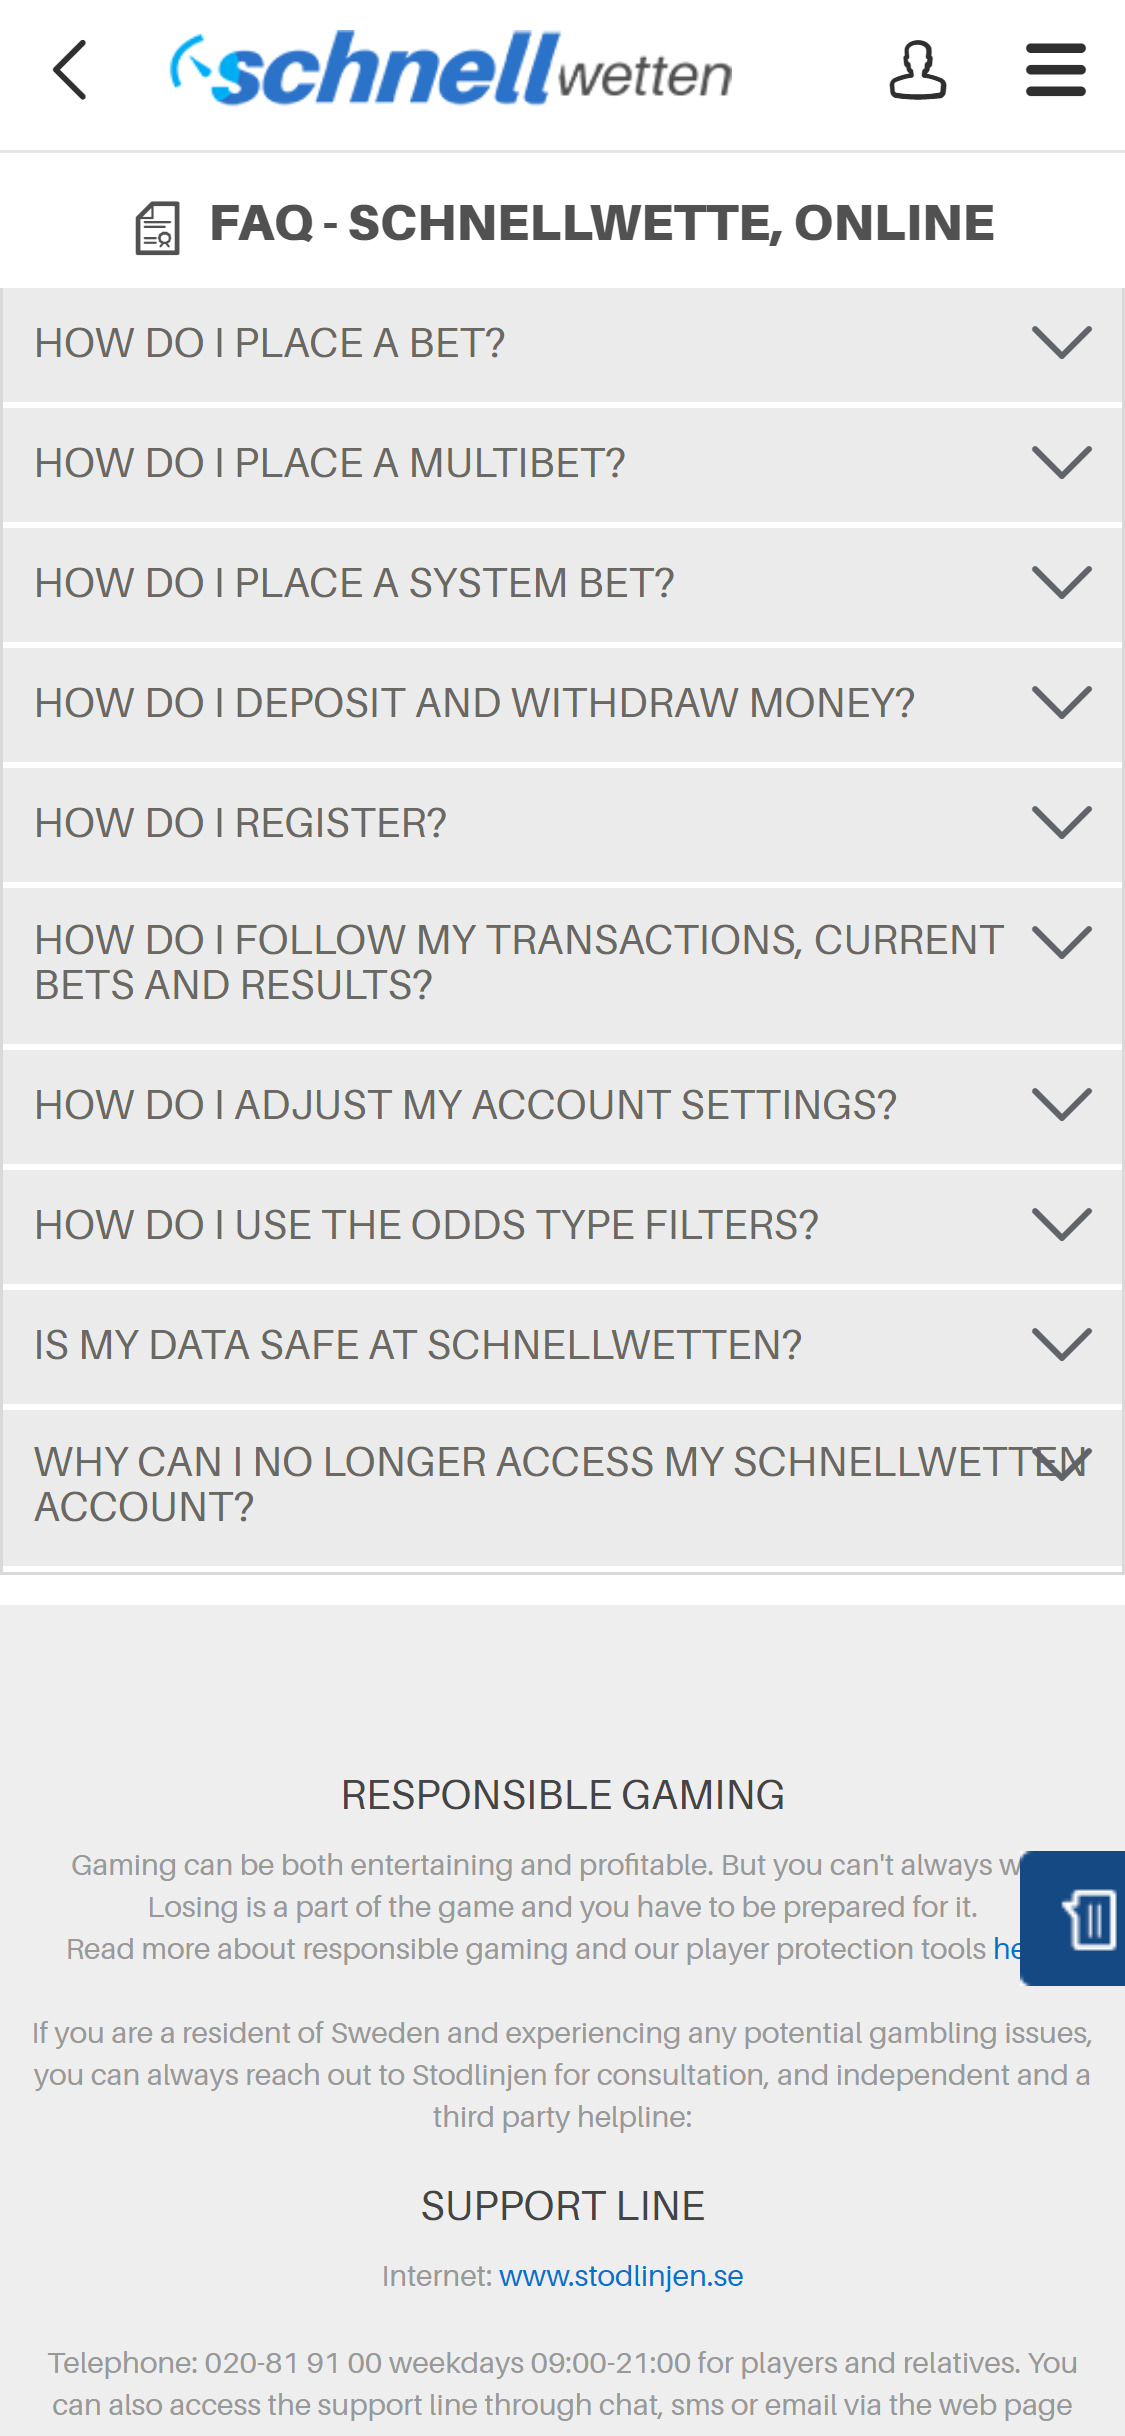 SchnellWetten Casino Mobile Support Review